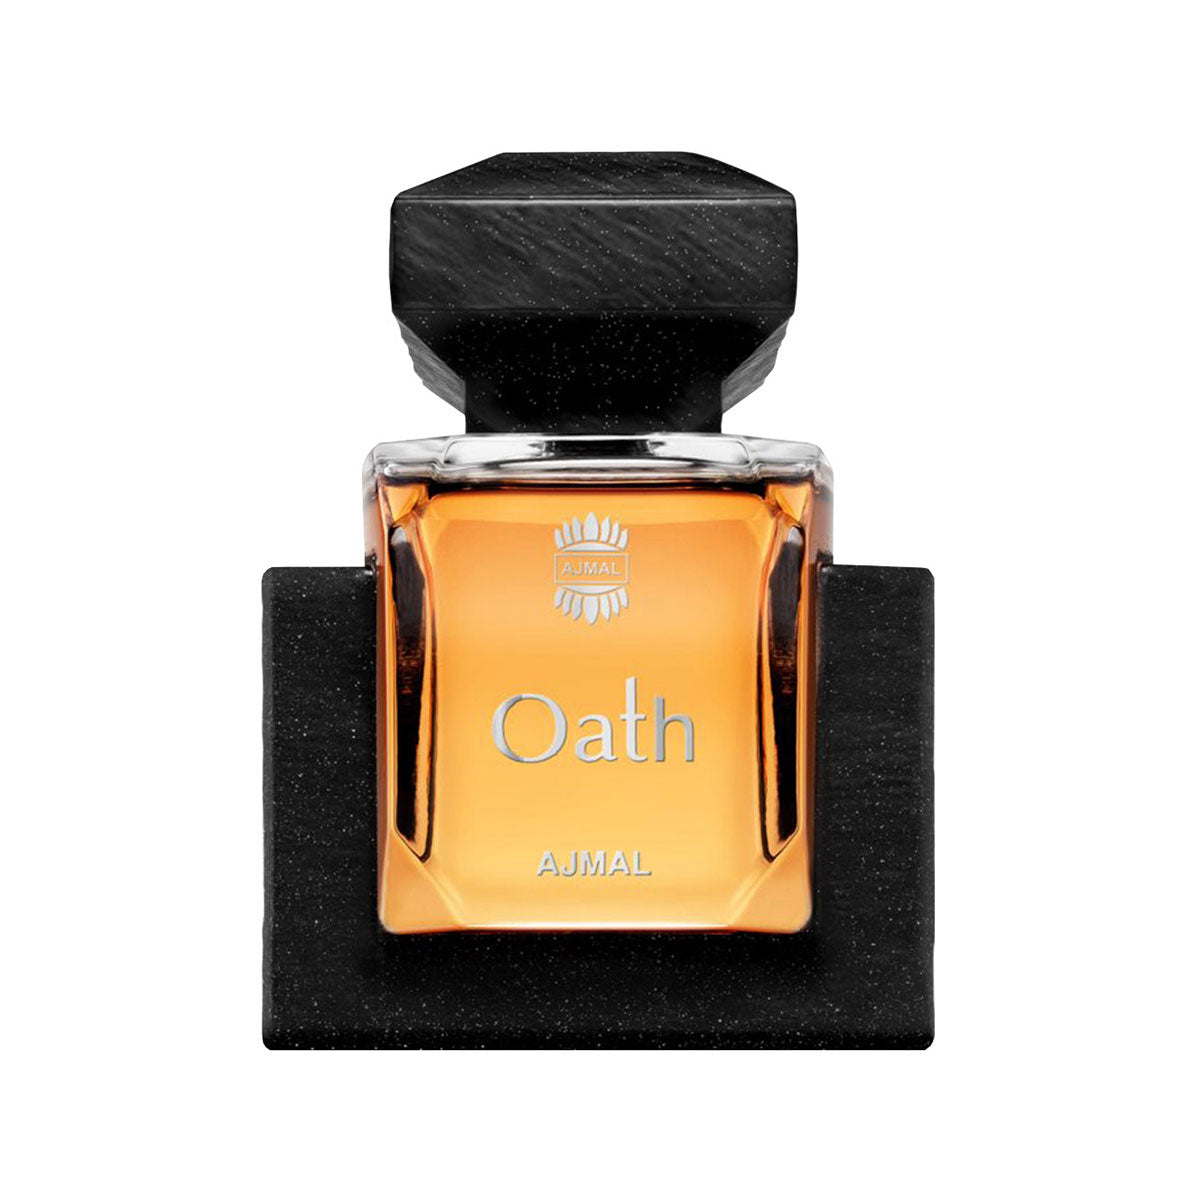 FOR HIM 100 ML